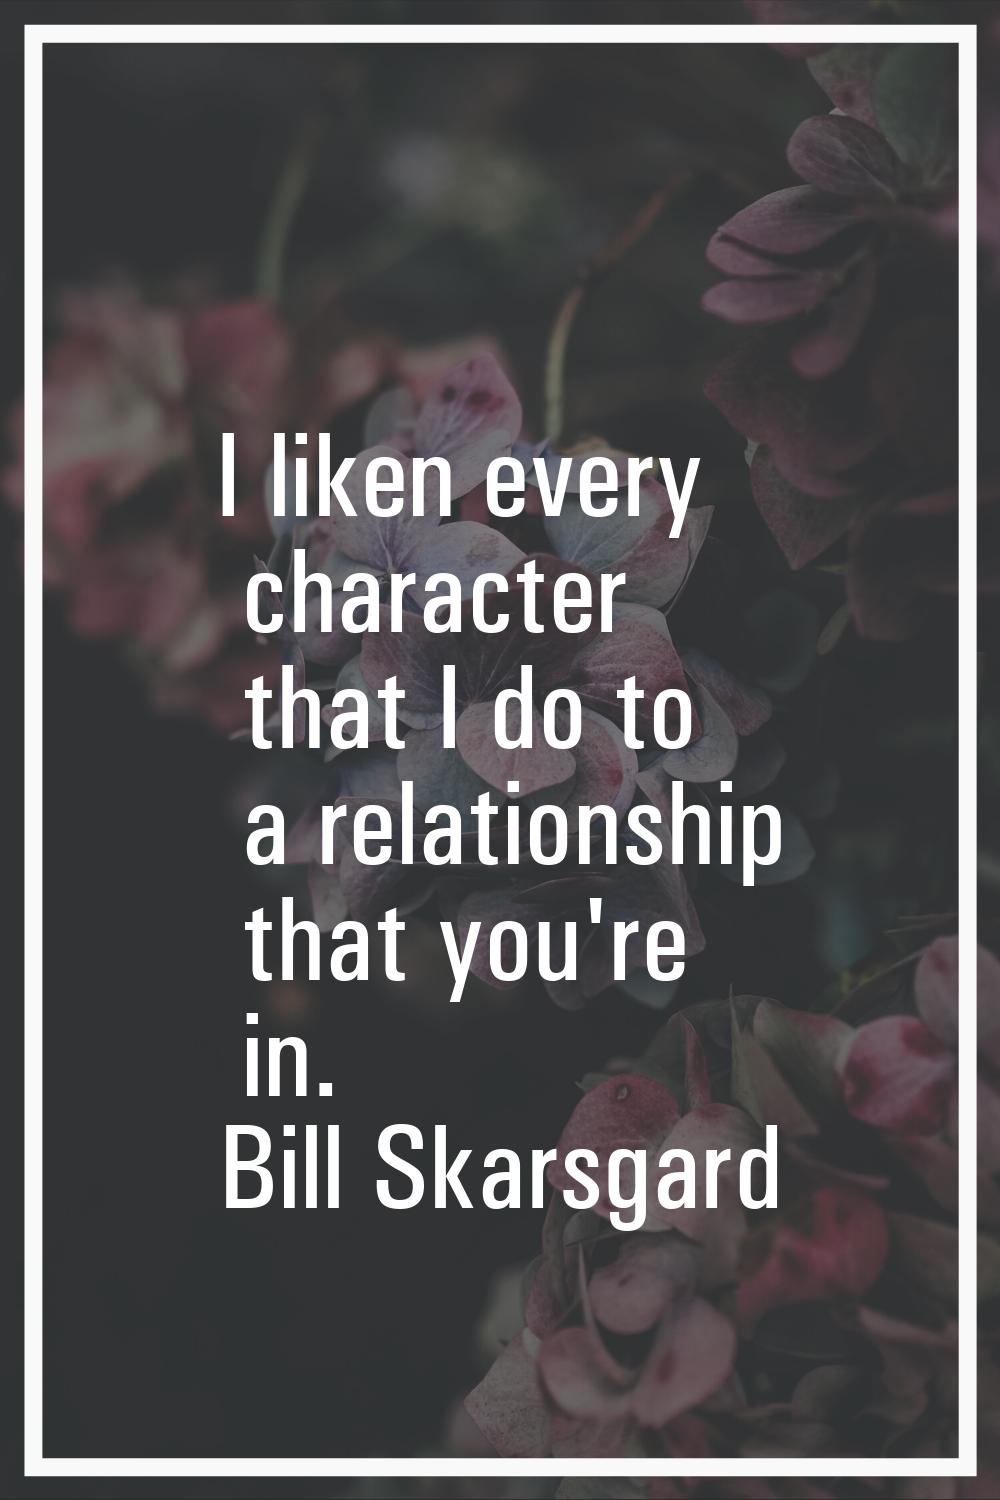 I liken every character that I do to a relationship that you're in.